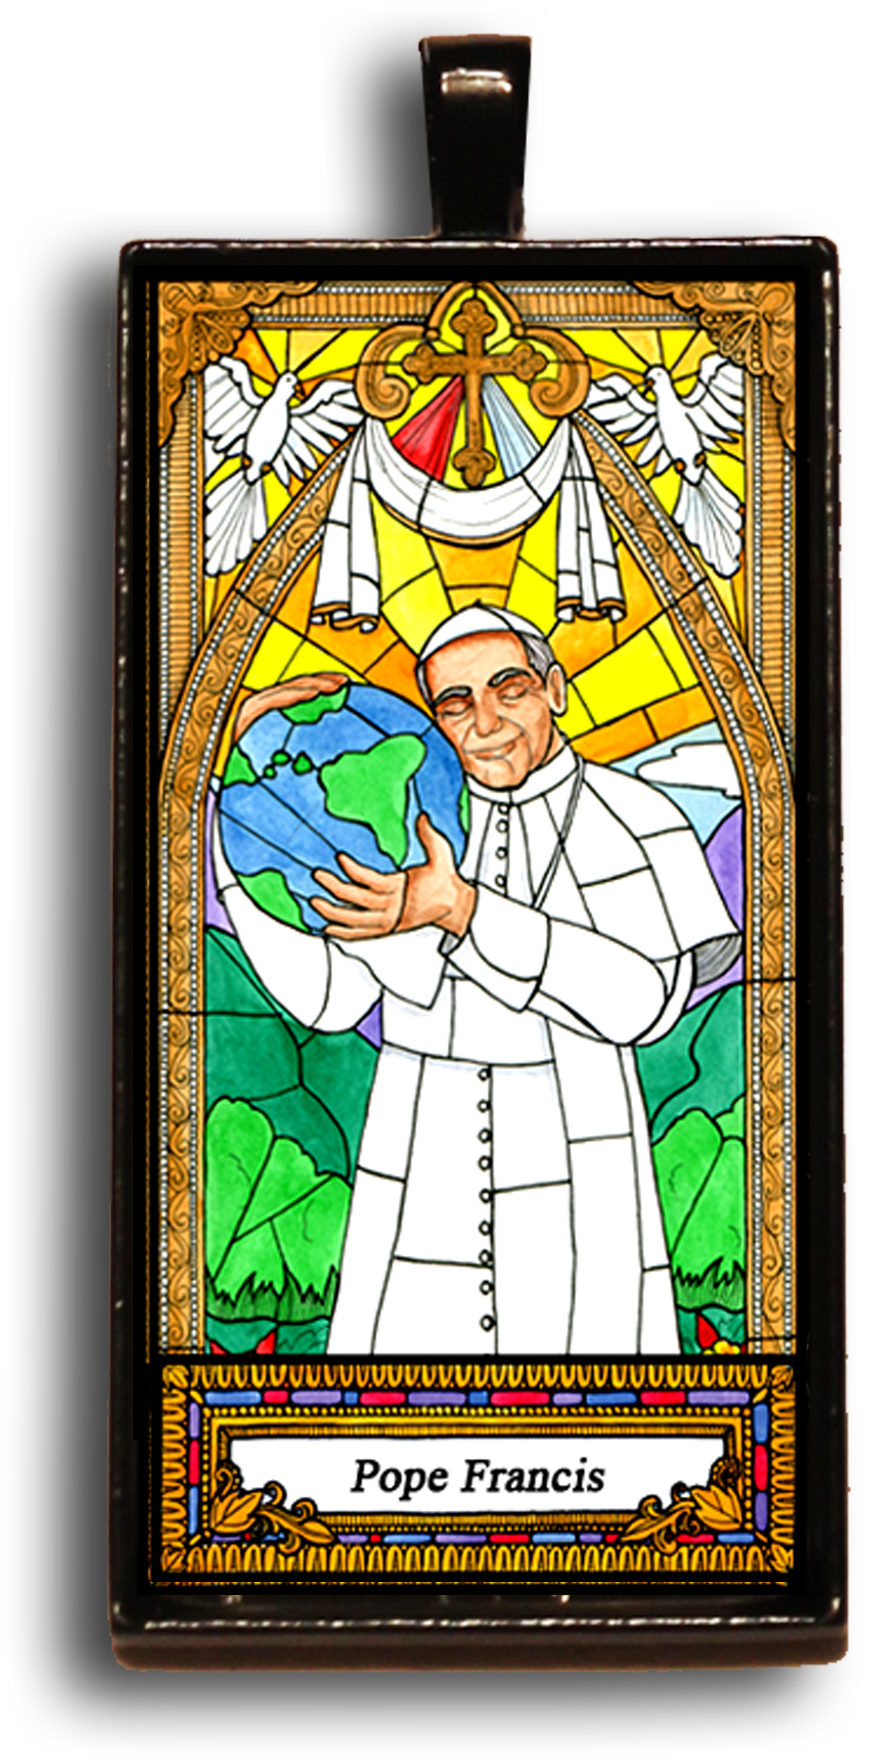 A Stained Glass Window With A Man Holding A Globe